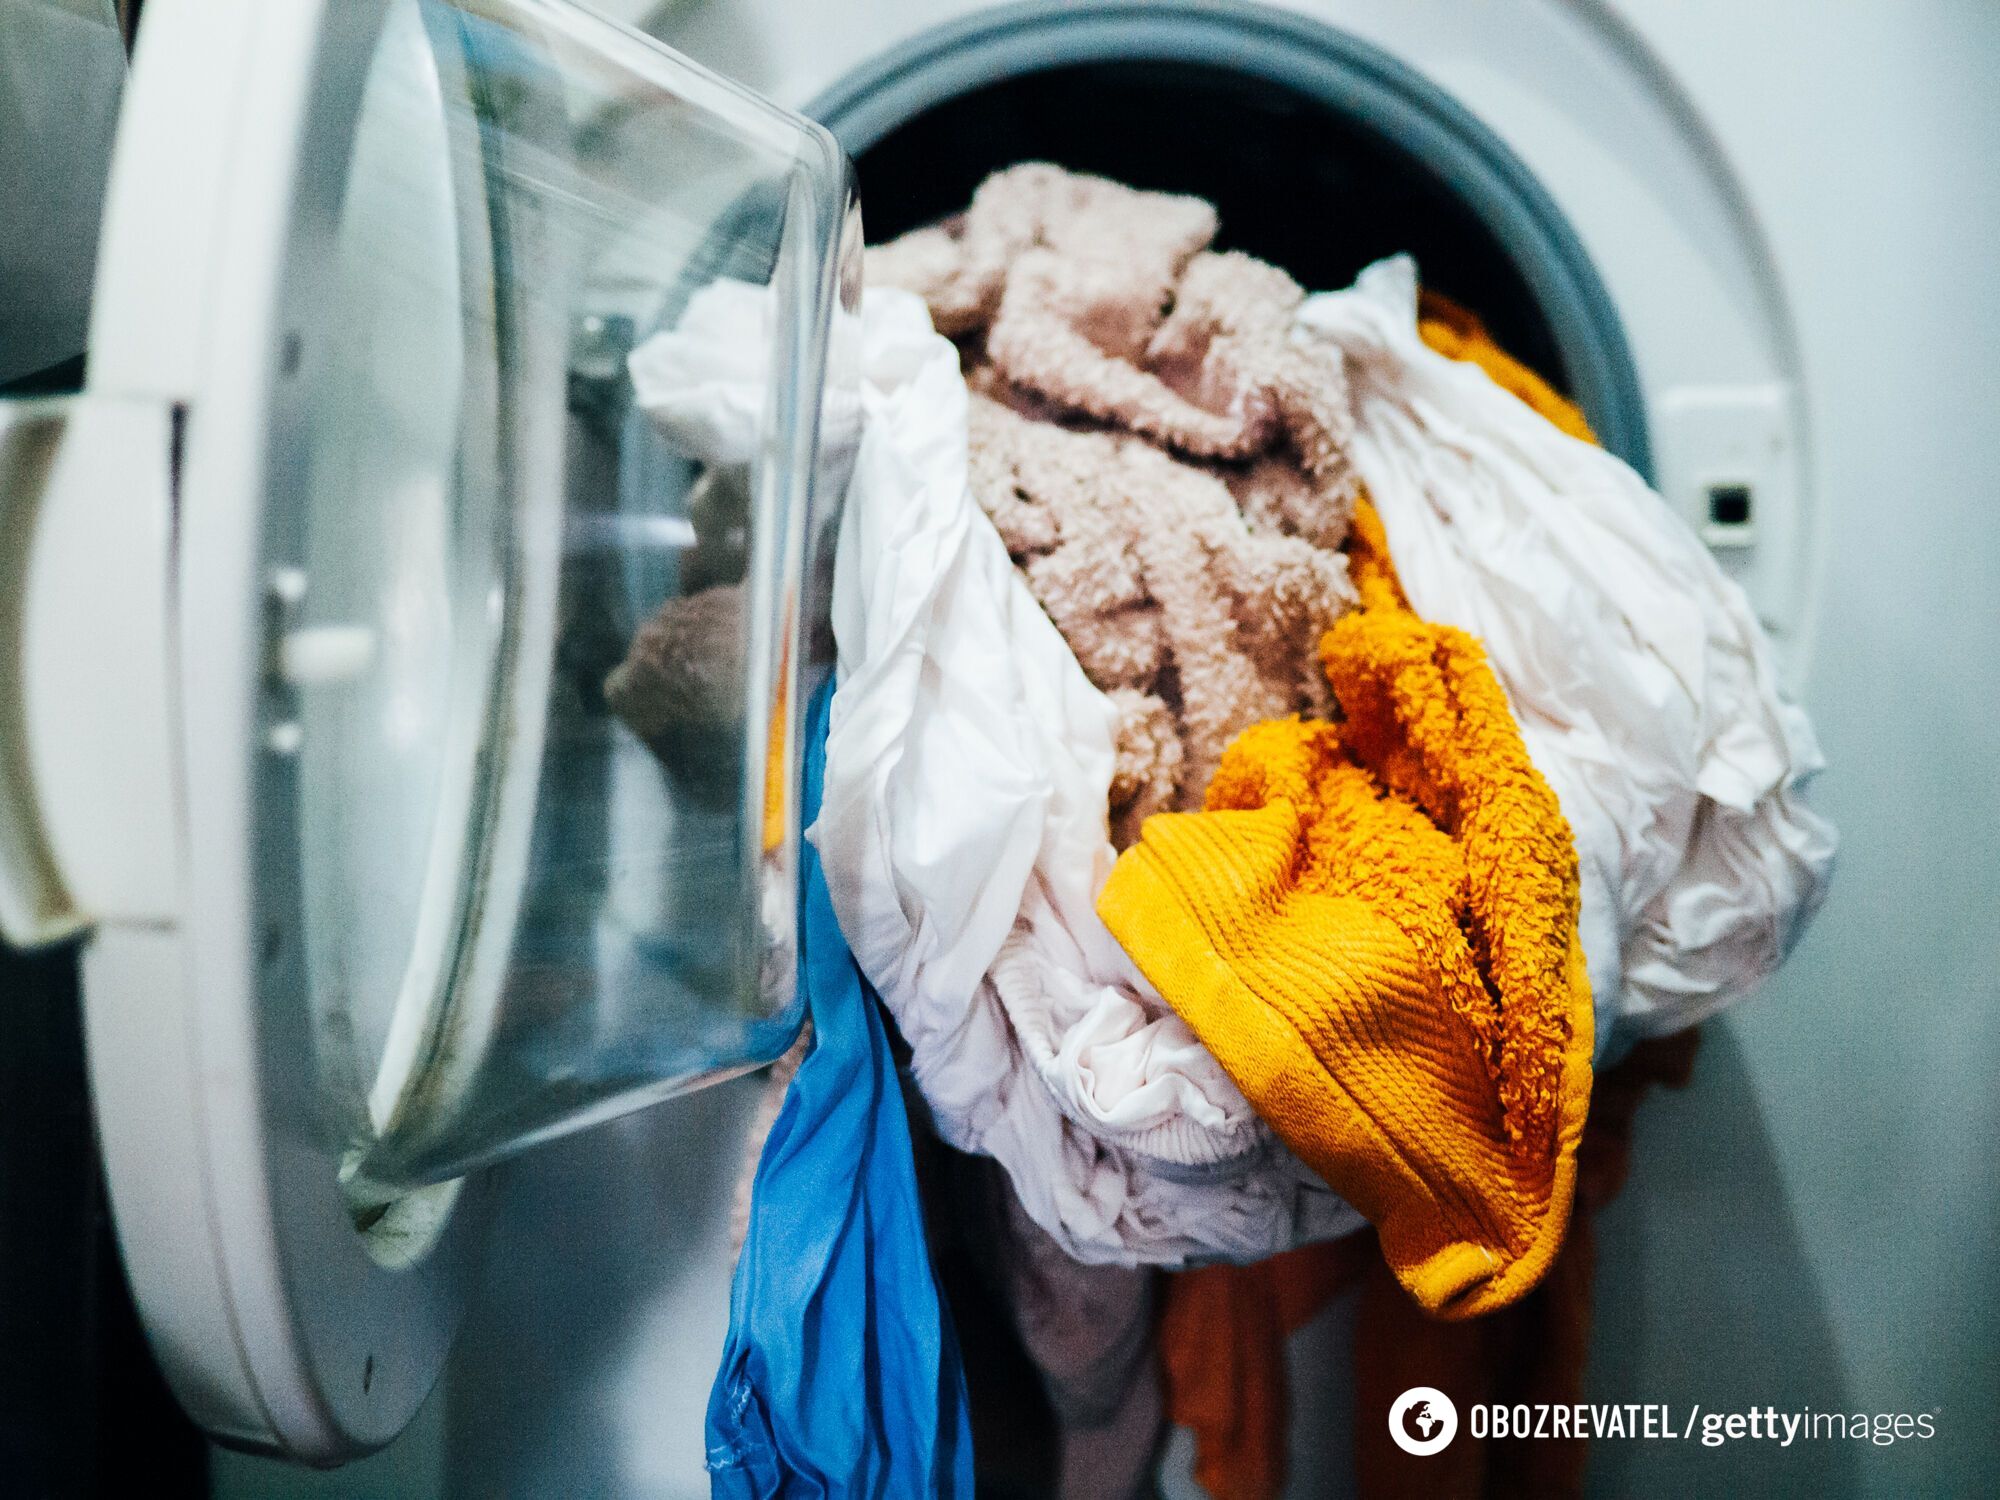 Specialist named things that should not be washed in the washing machine